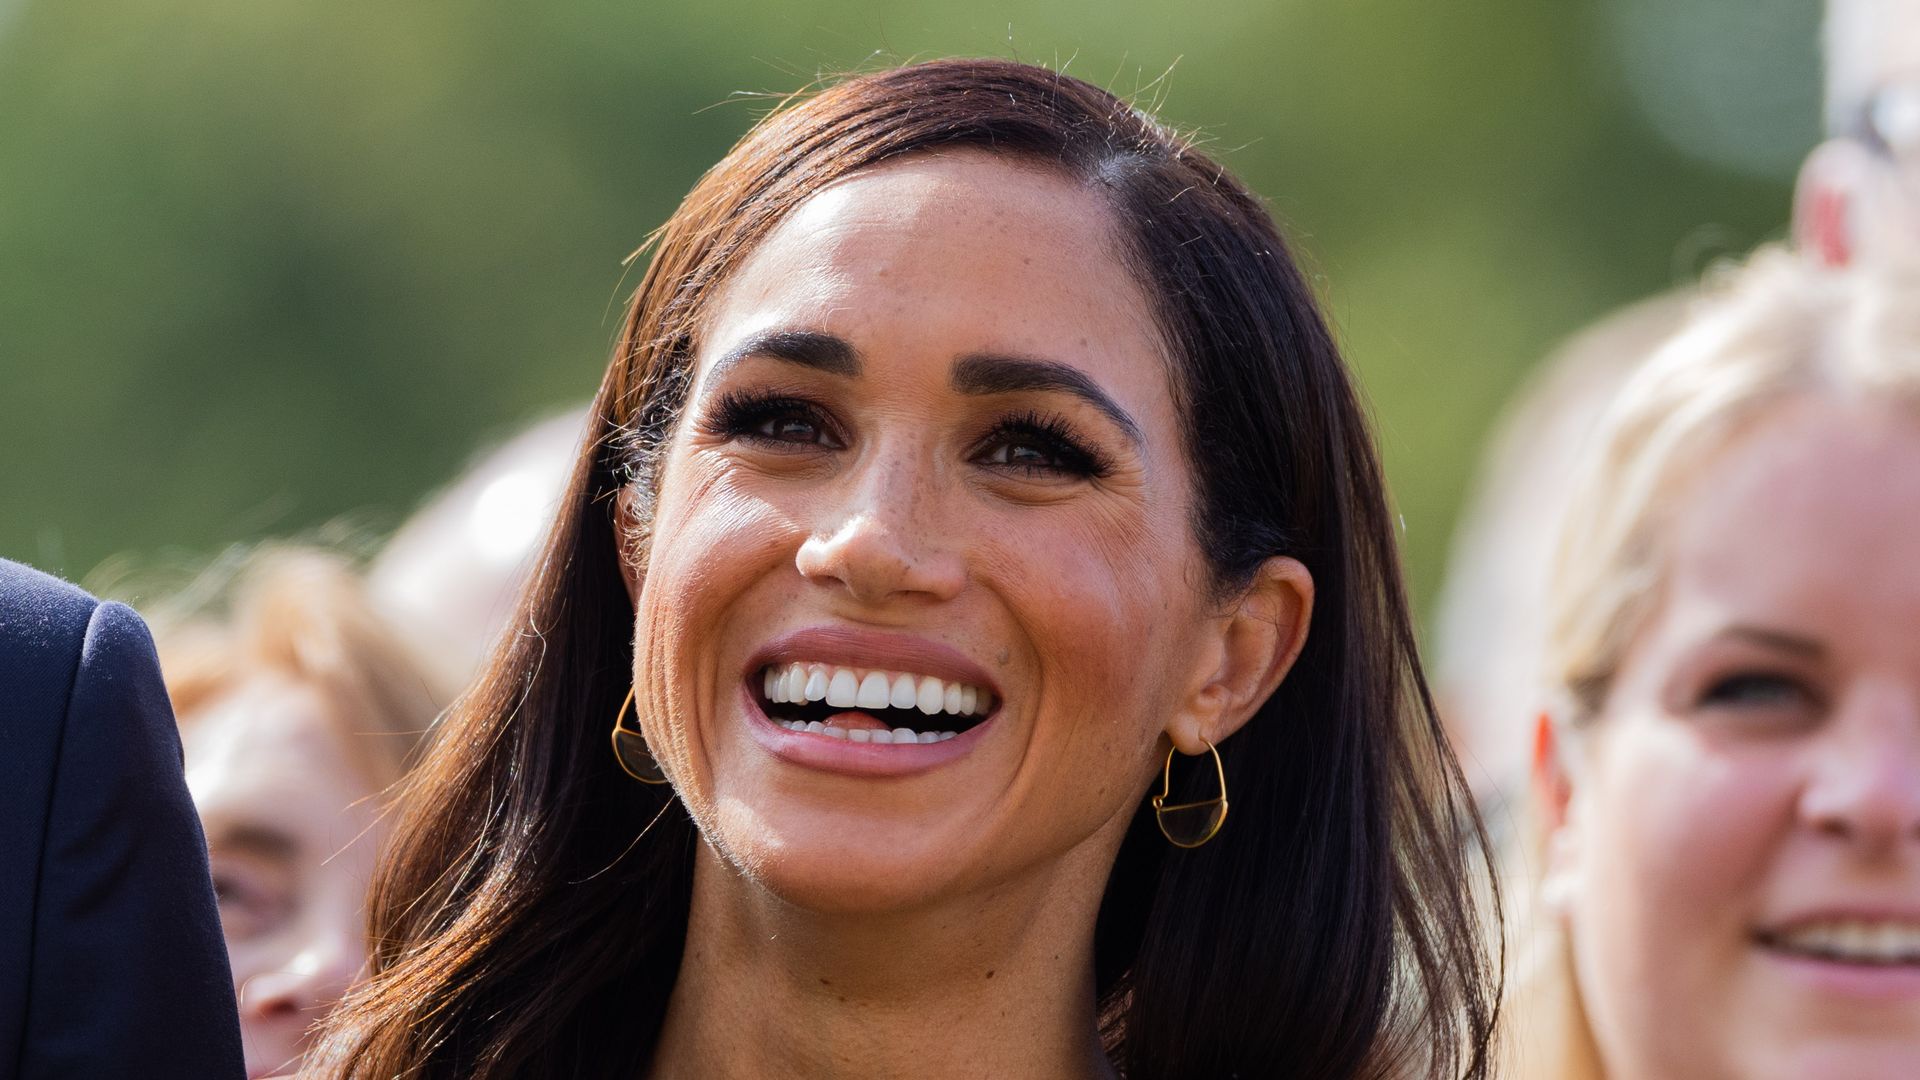 The earrings were just one of the affordable pieces Meghan wore during her week in Germany, along with labels like Banana Republic and J Crew